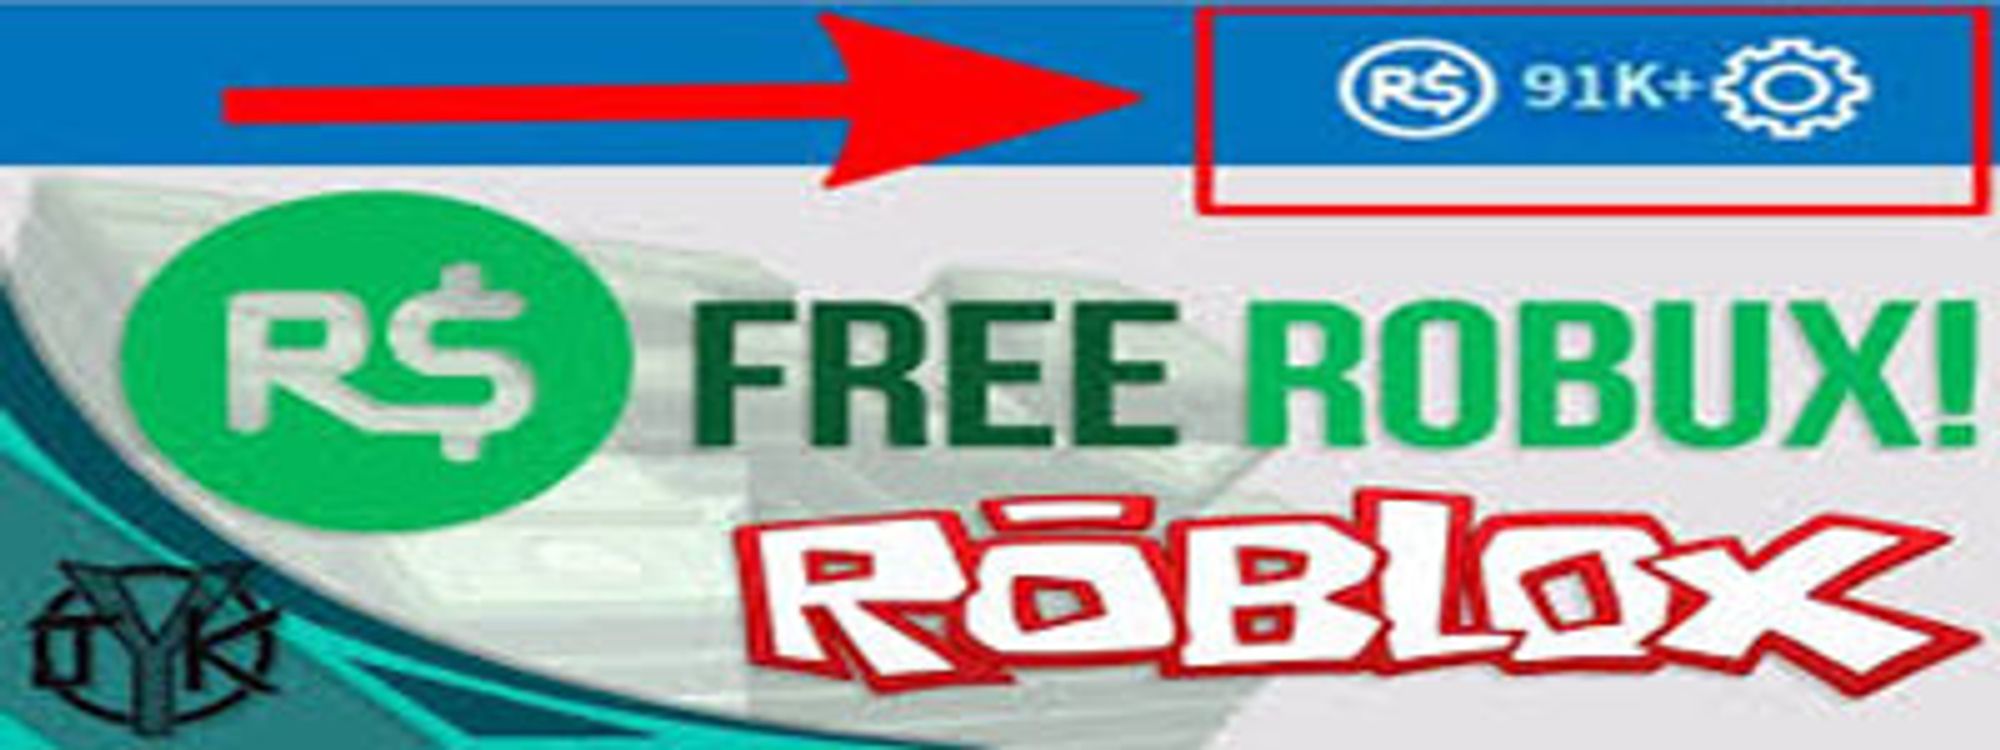 Roblox Robux Free Roblox Robux Codes With Skins Password Account 2020 - roblox fake login robuxcodes2020list robuxcodes monster